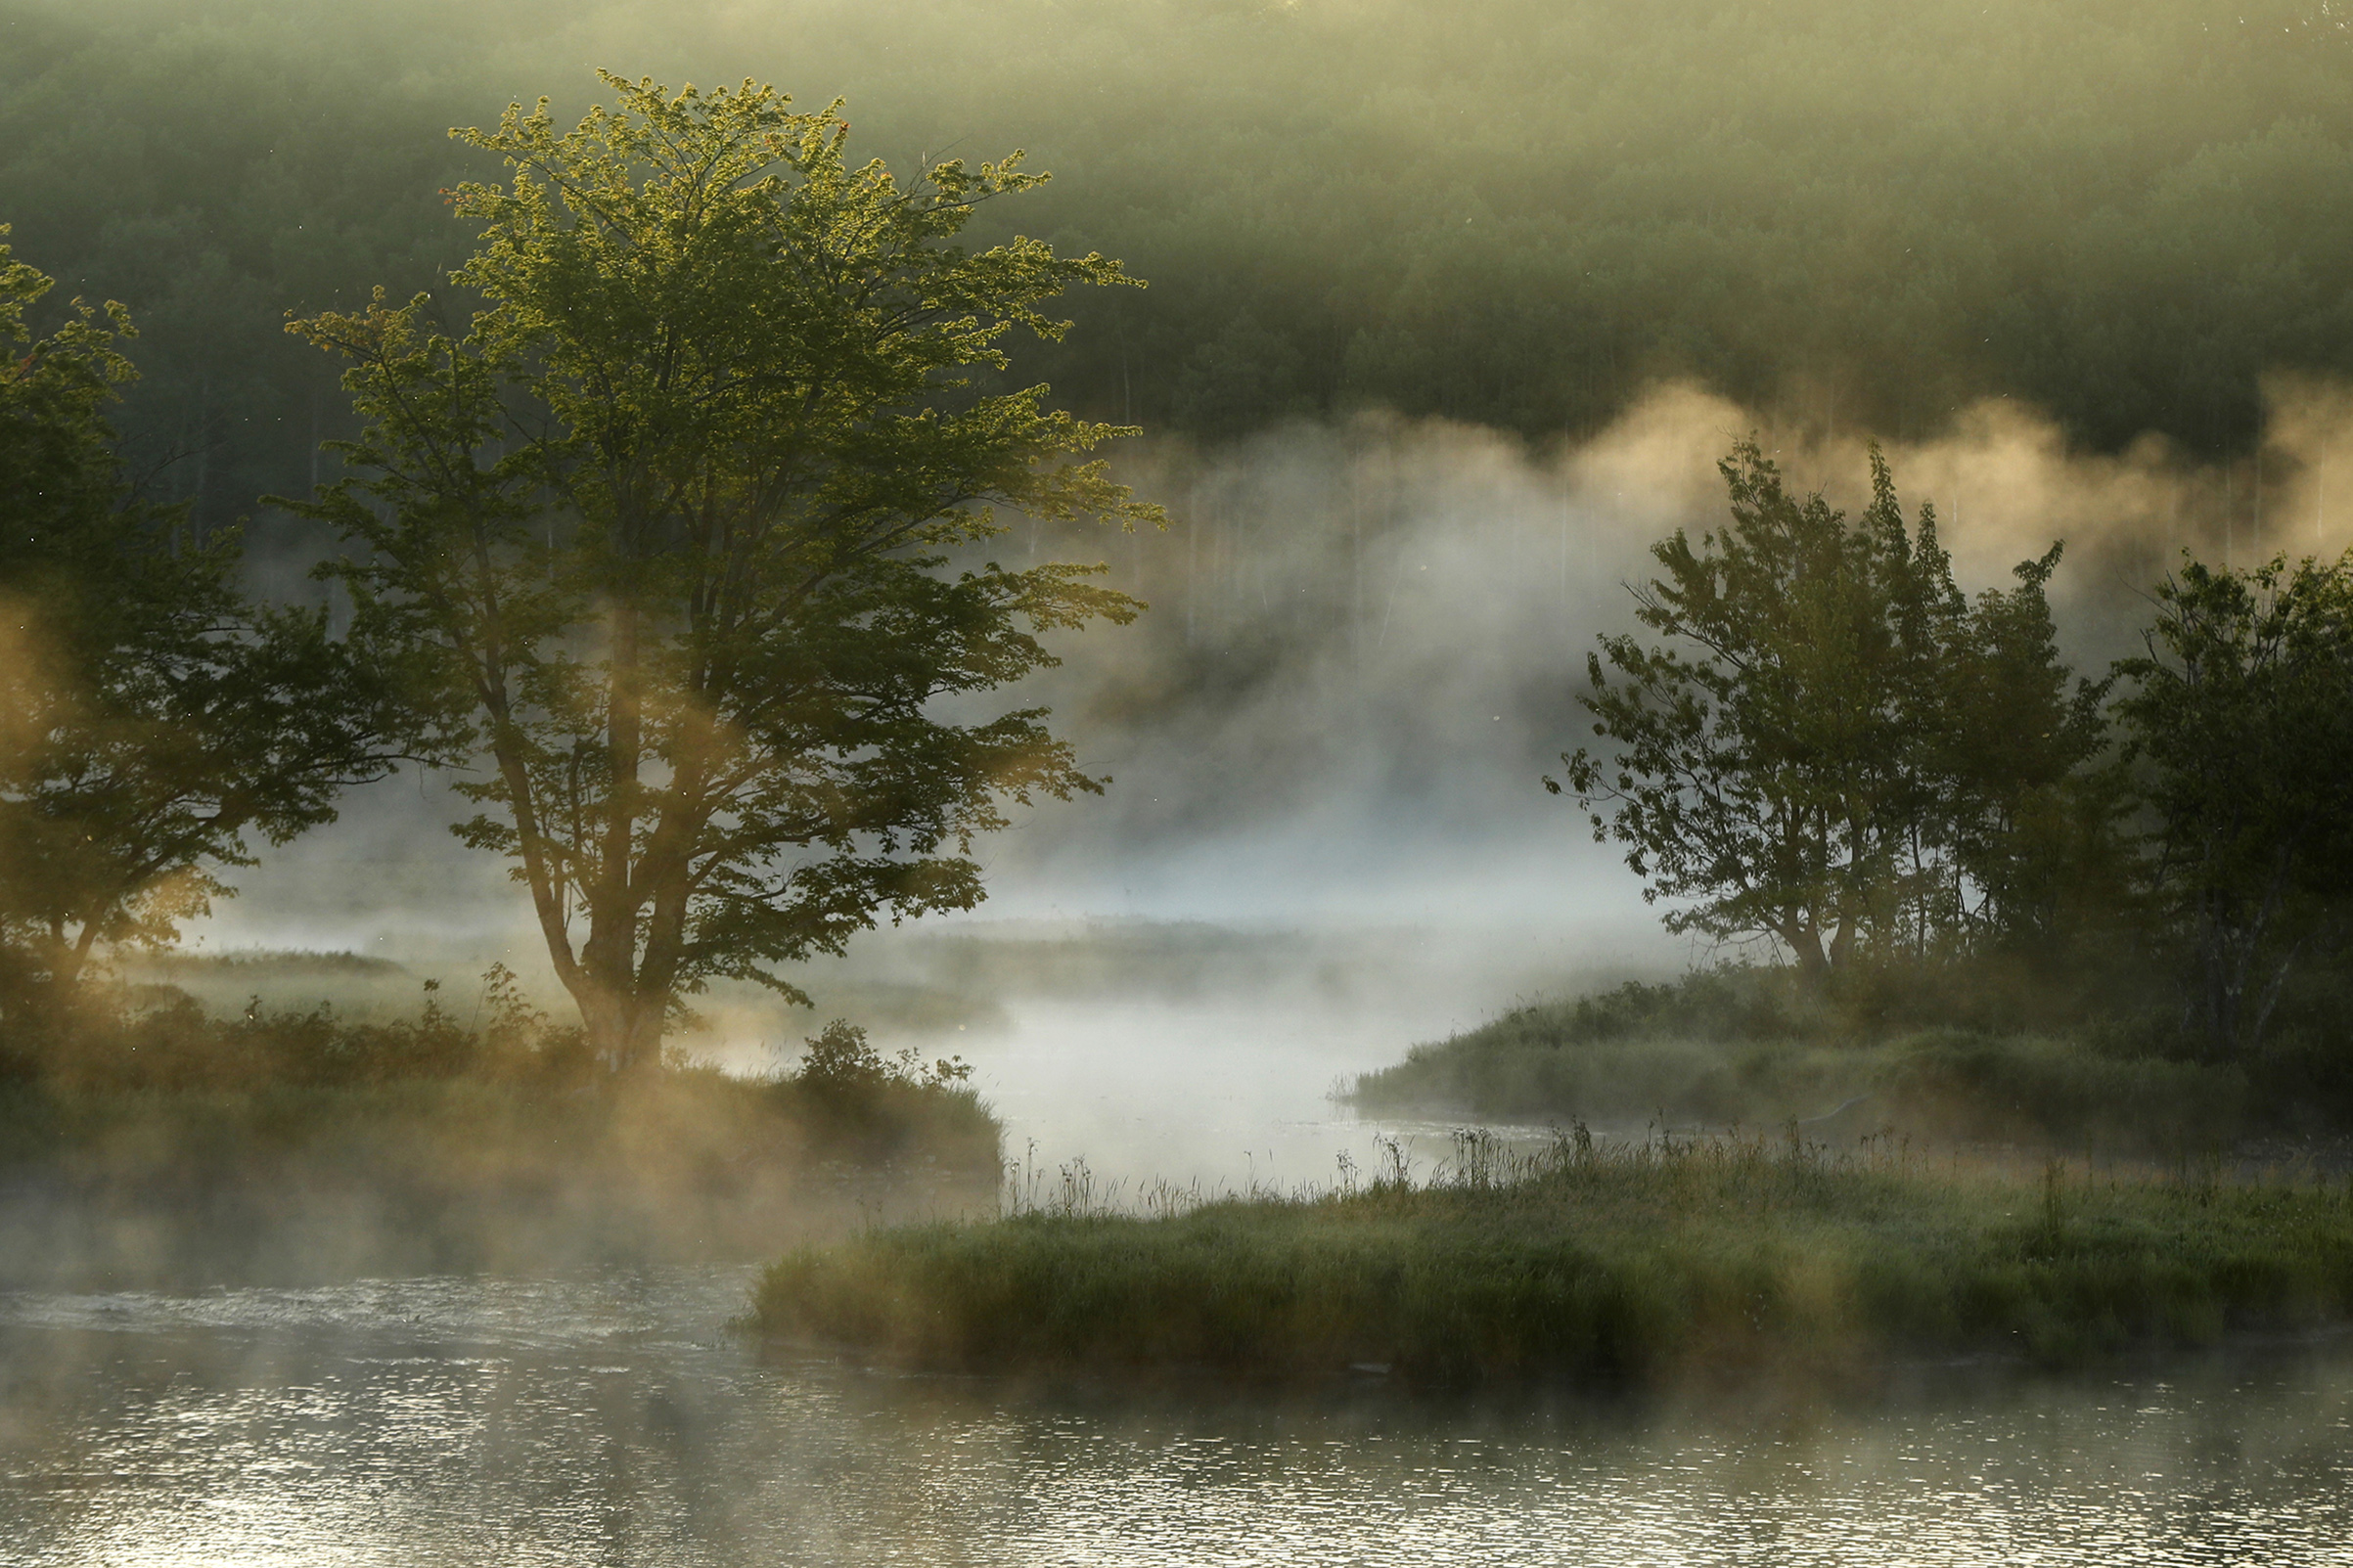 Fog rises from the Penobscot River's East Branch in the Katahdin Woods and Waters National Monument near Patten, Maine, on Aug. 10, 2017. (Robert F. Bukaty—AP)